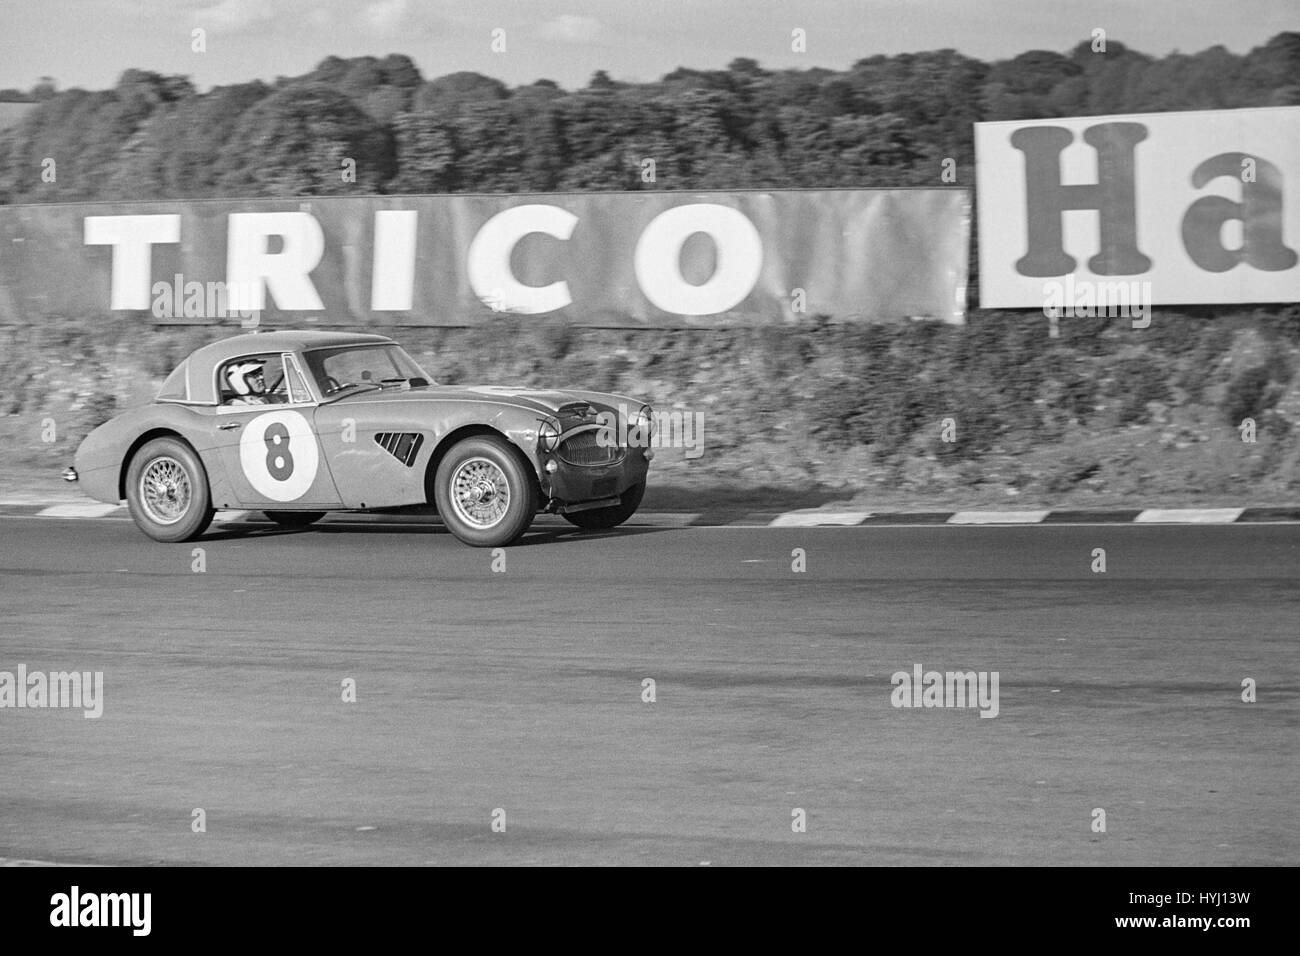 Austin Healey sports car racing at Brands Hatch in England during the 1960s. Stock Photo